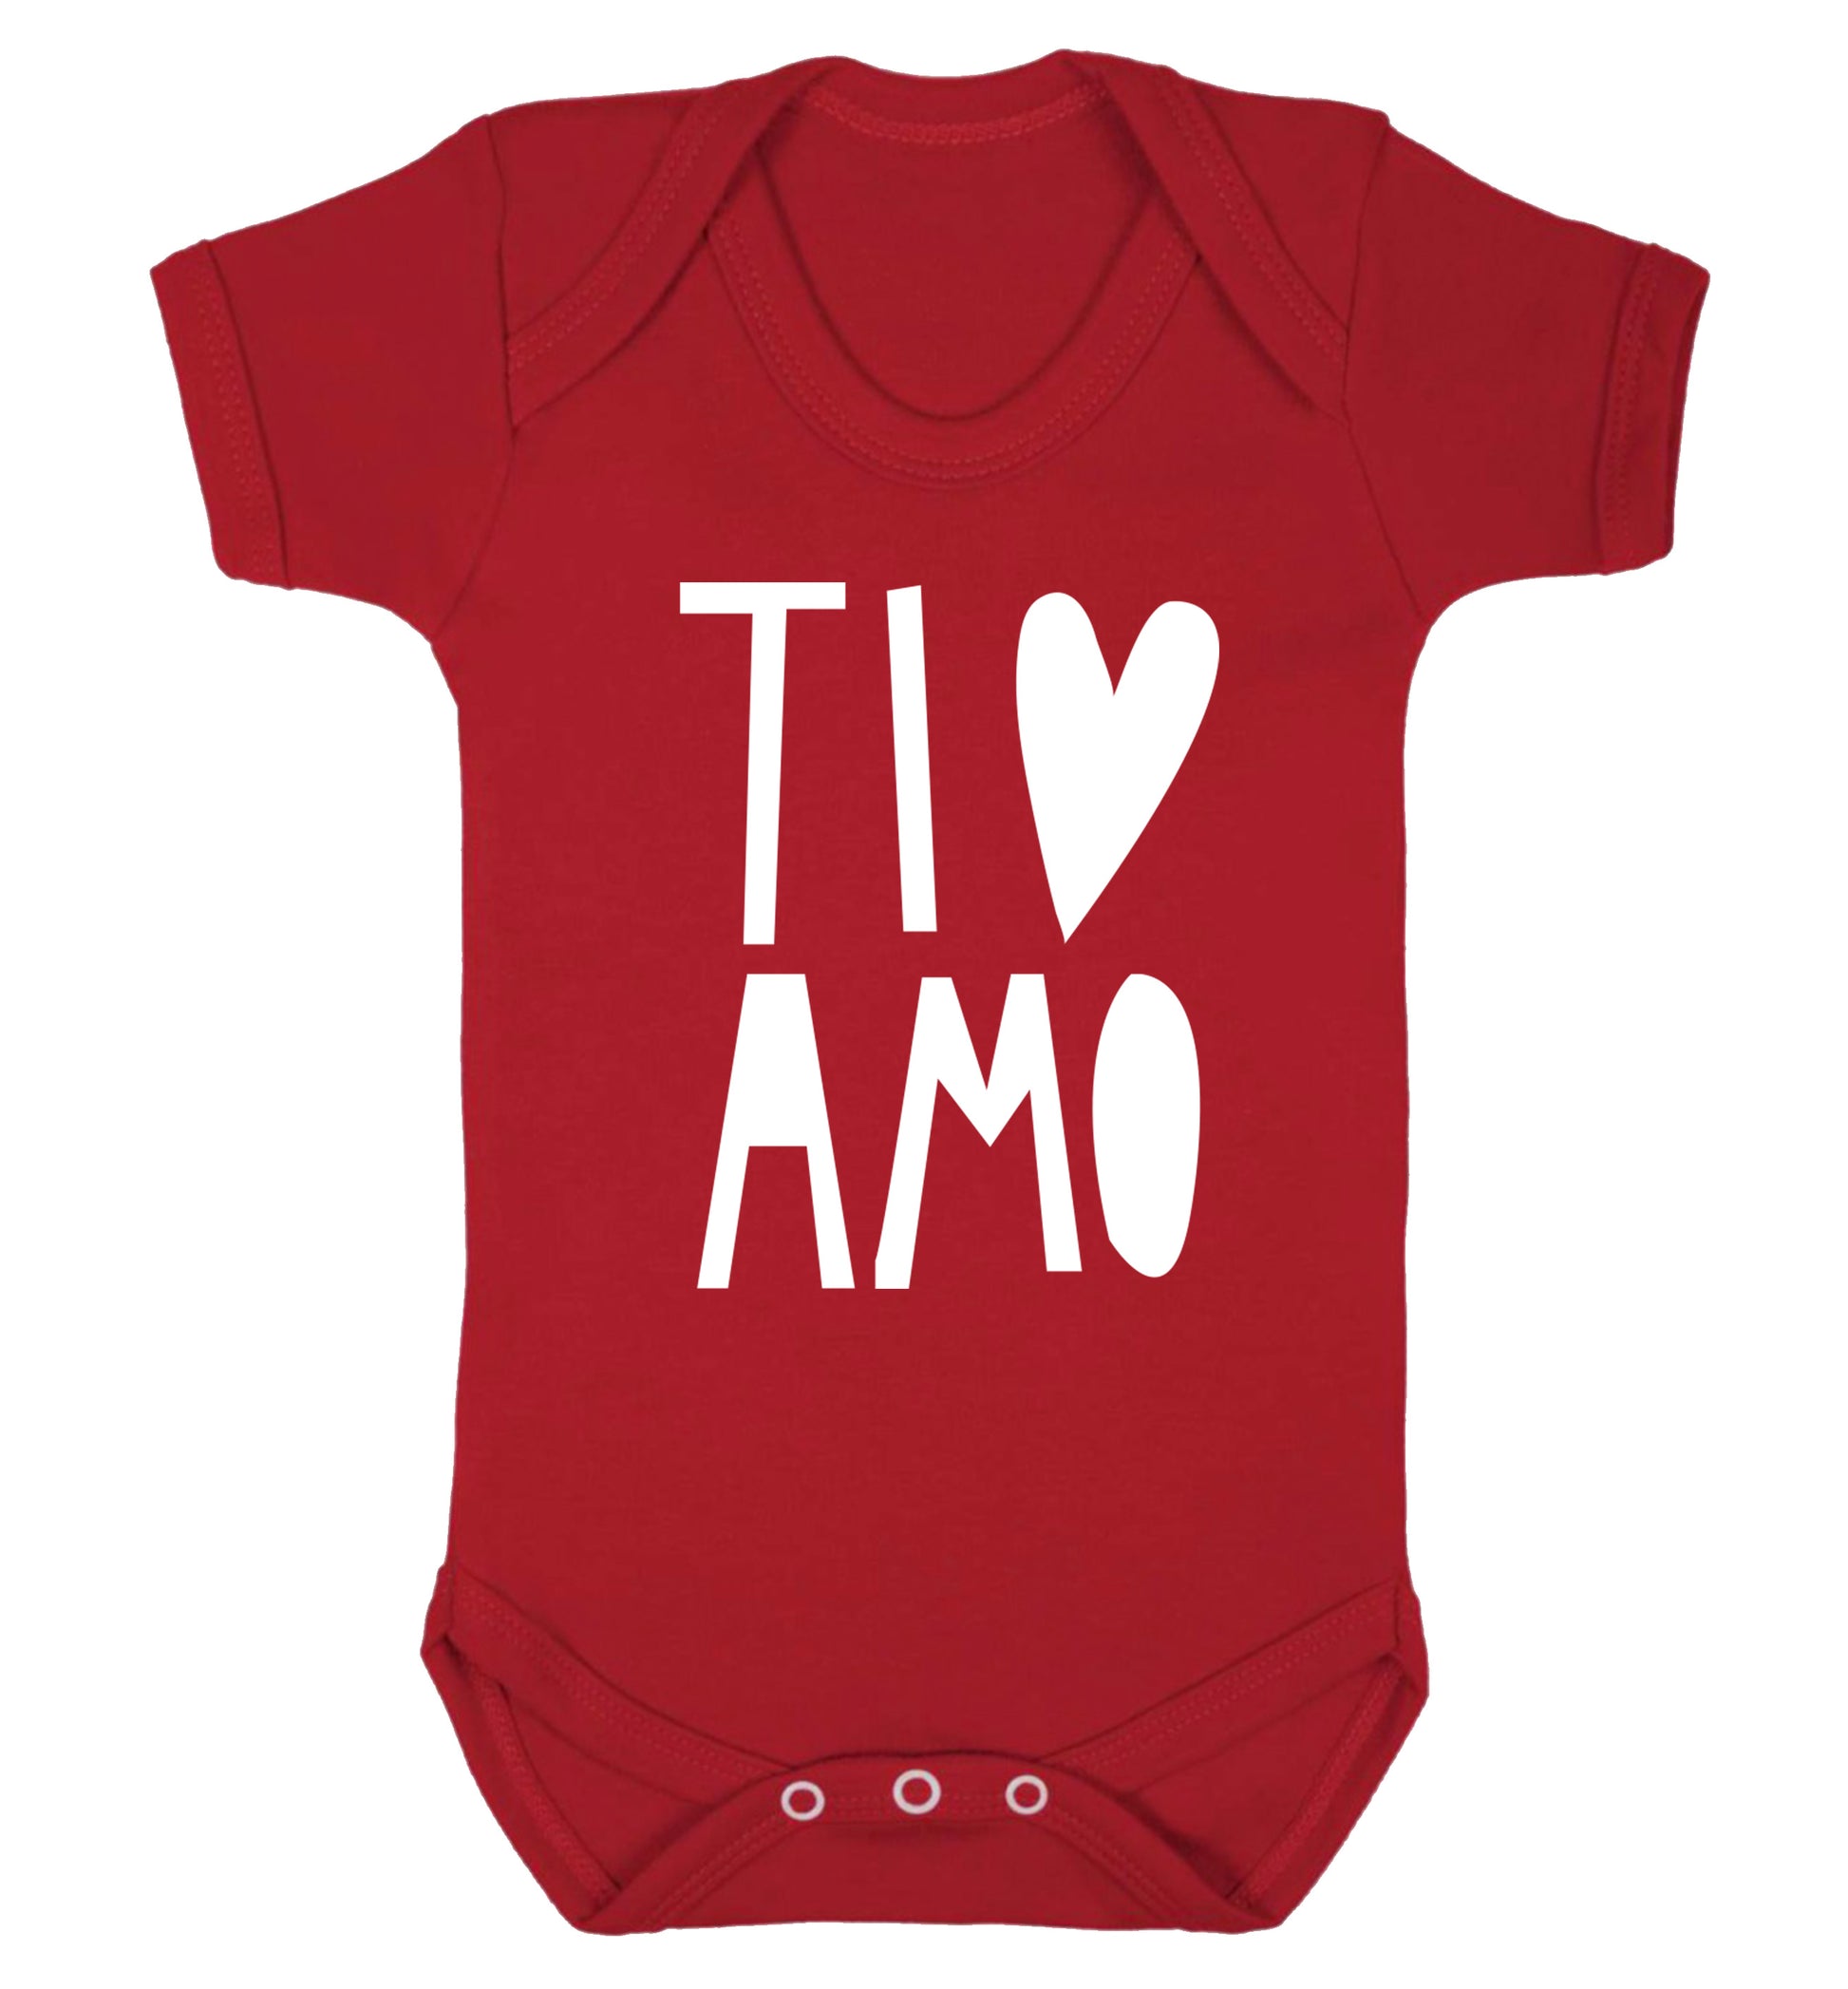 Ti amo - I love you Baby Vest red 18-24 months